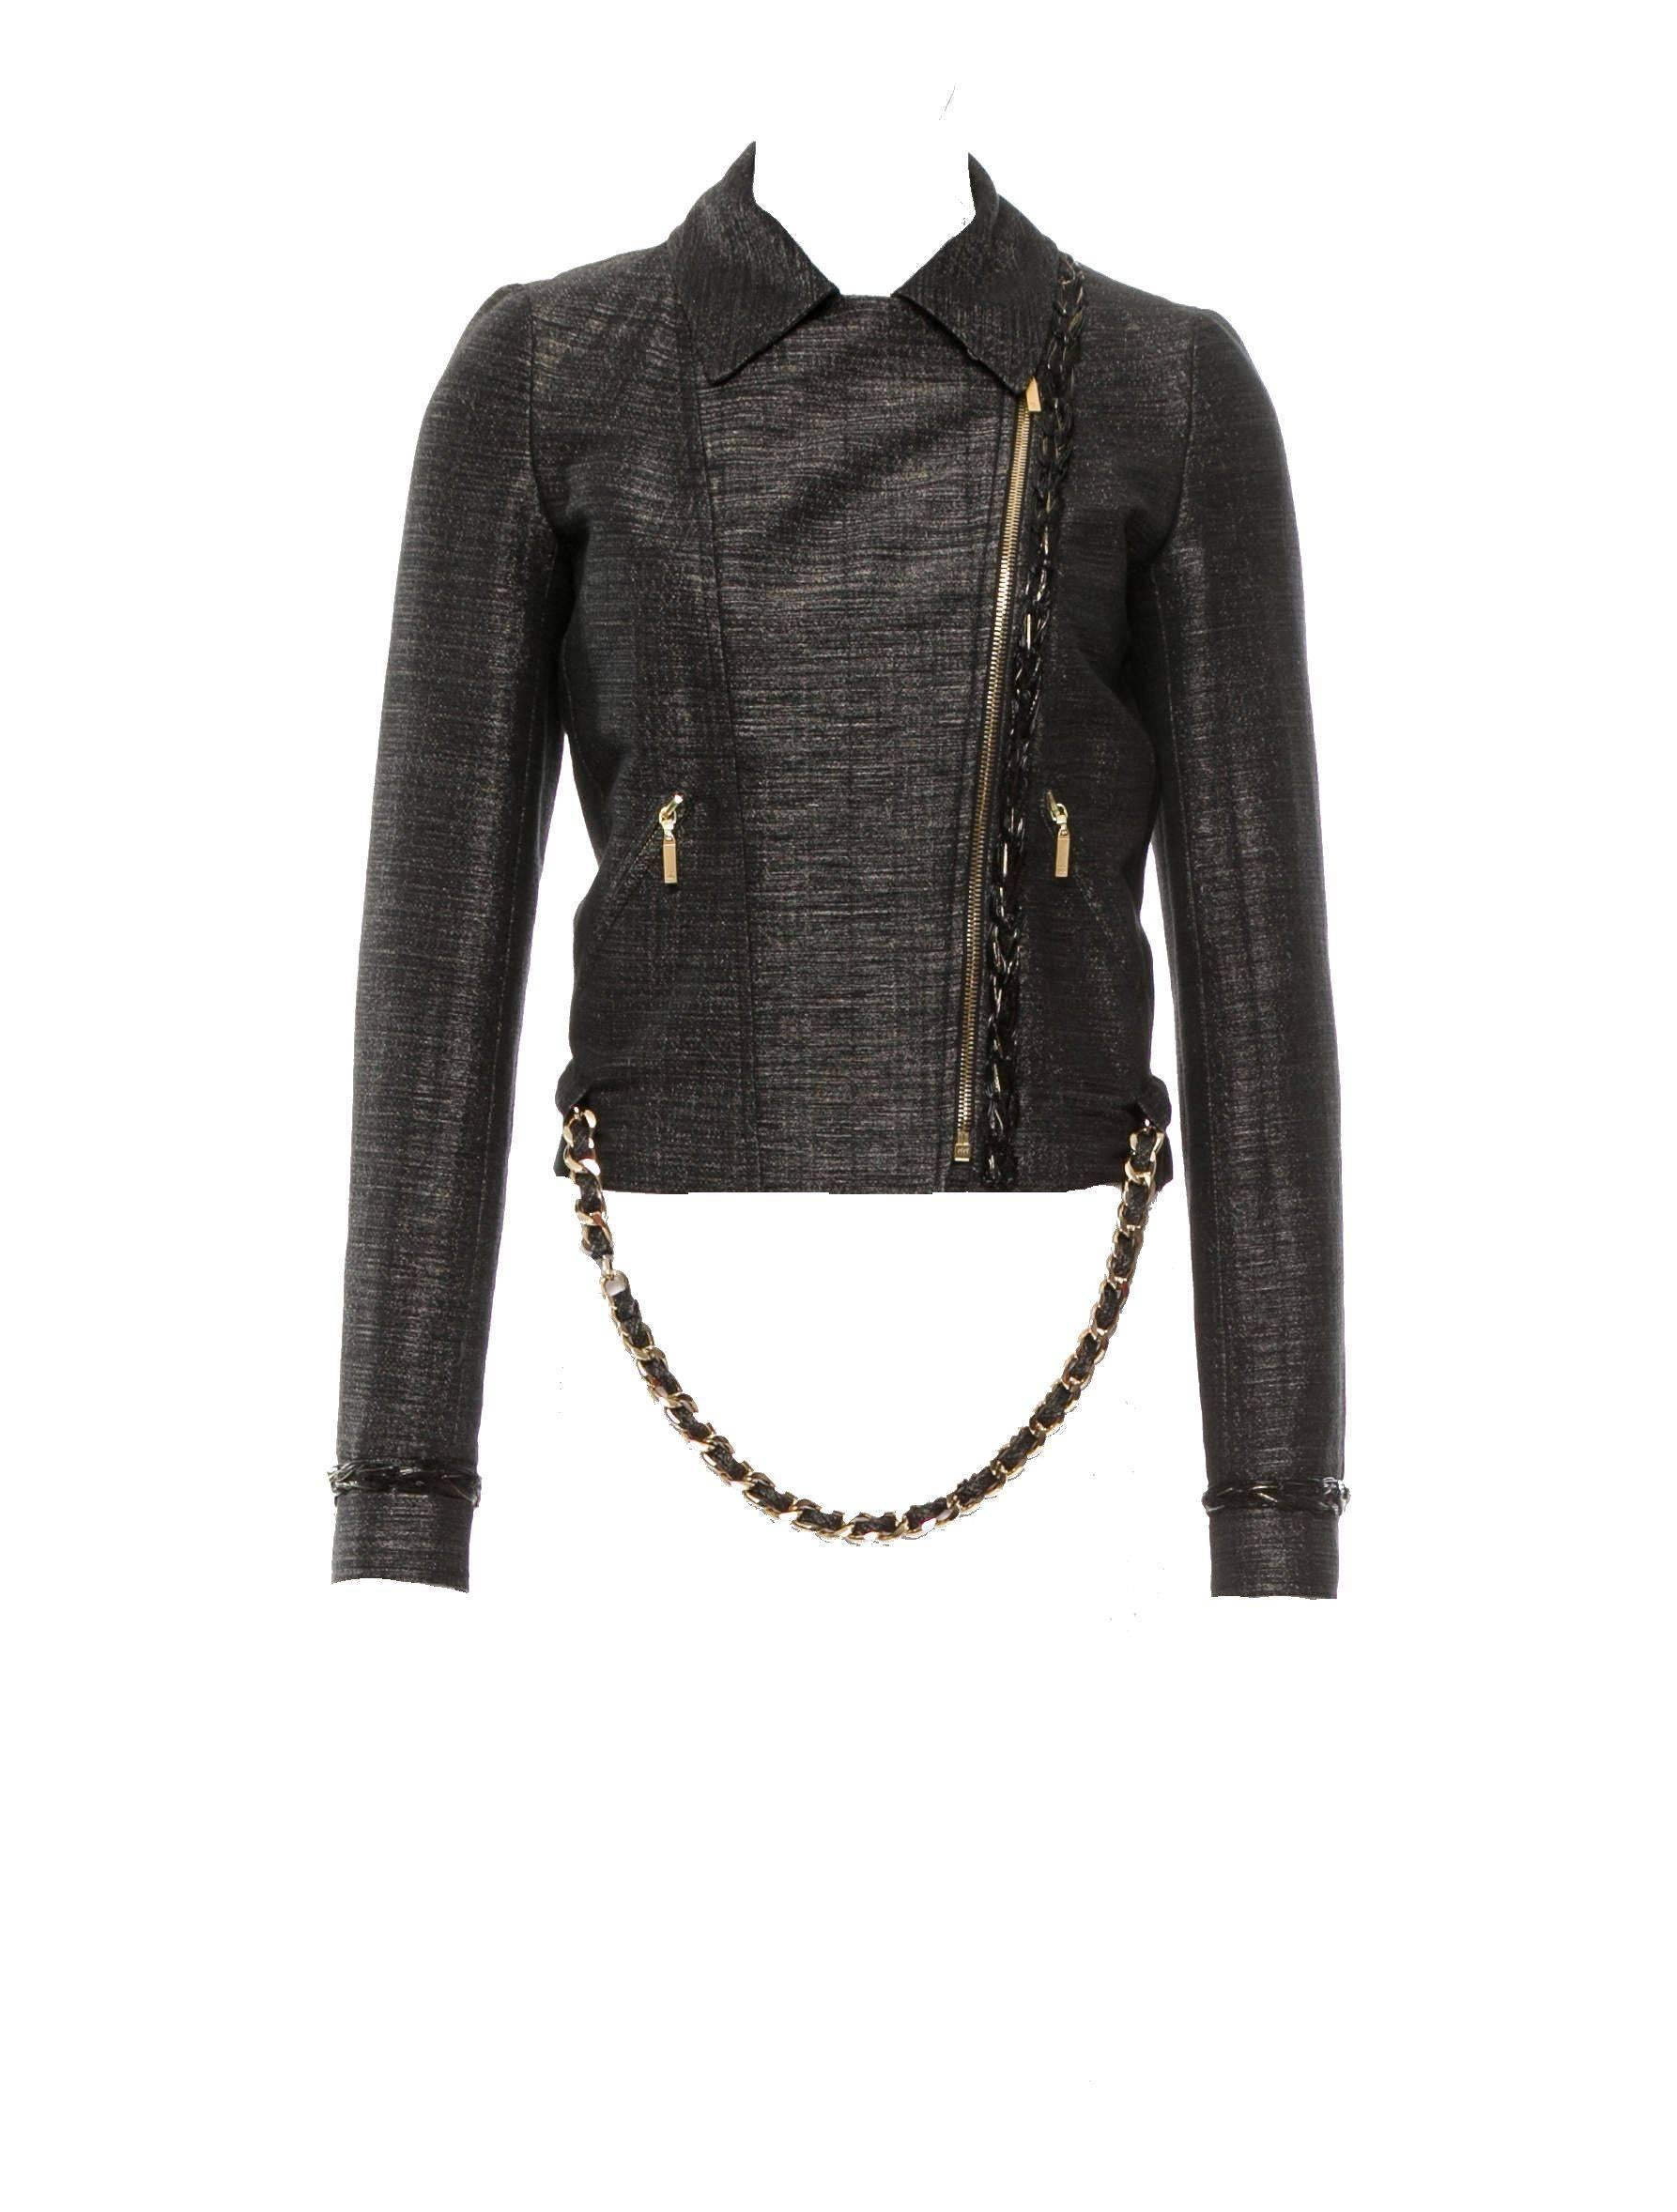 Fantastic Chanel Jacket designed by Karl Lagerfeld
Biker design
Fully lined with golden fabric
Closes in front with asymmetric zip
CC logo on buttons and zippers
Chain trimming
Heavy CC signature chain belt
Belt can be removed and worn with other